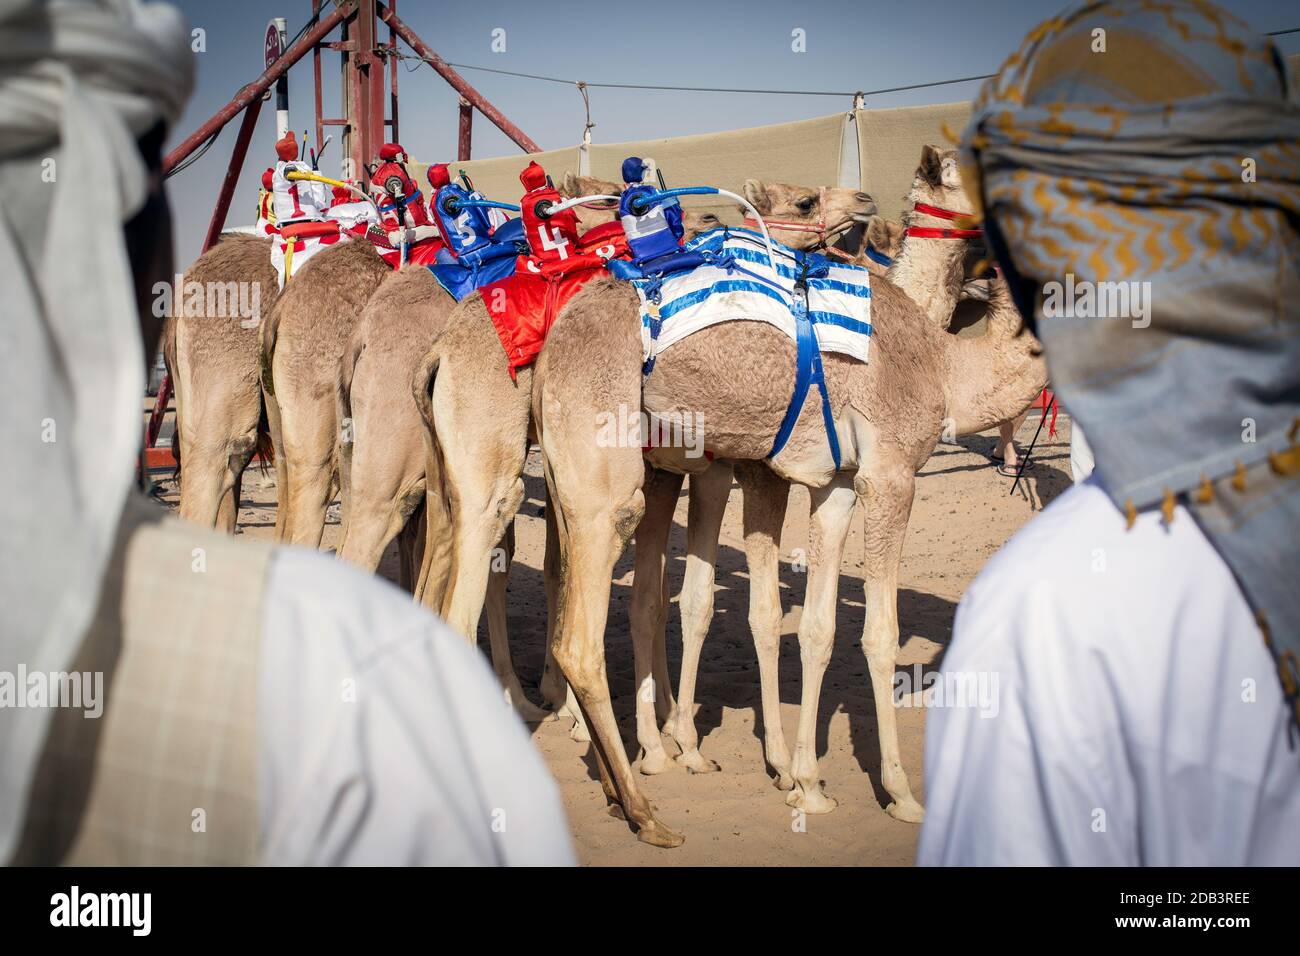 United Arab Emirates / Al Dhaid / Camel Race in Central Region of the Emirate of Sharjah in the United Arab EmiratesThe handlers also secure small ele Stock Photo